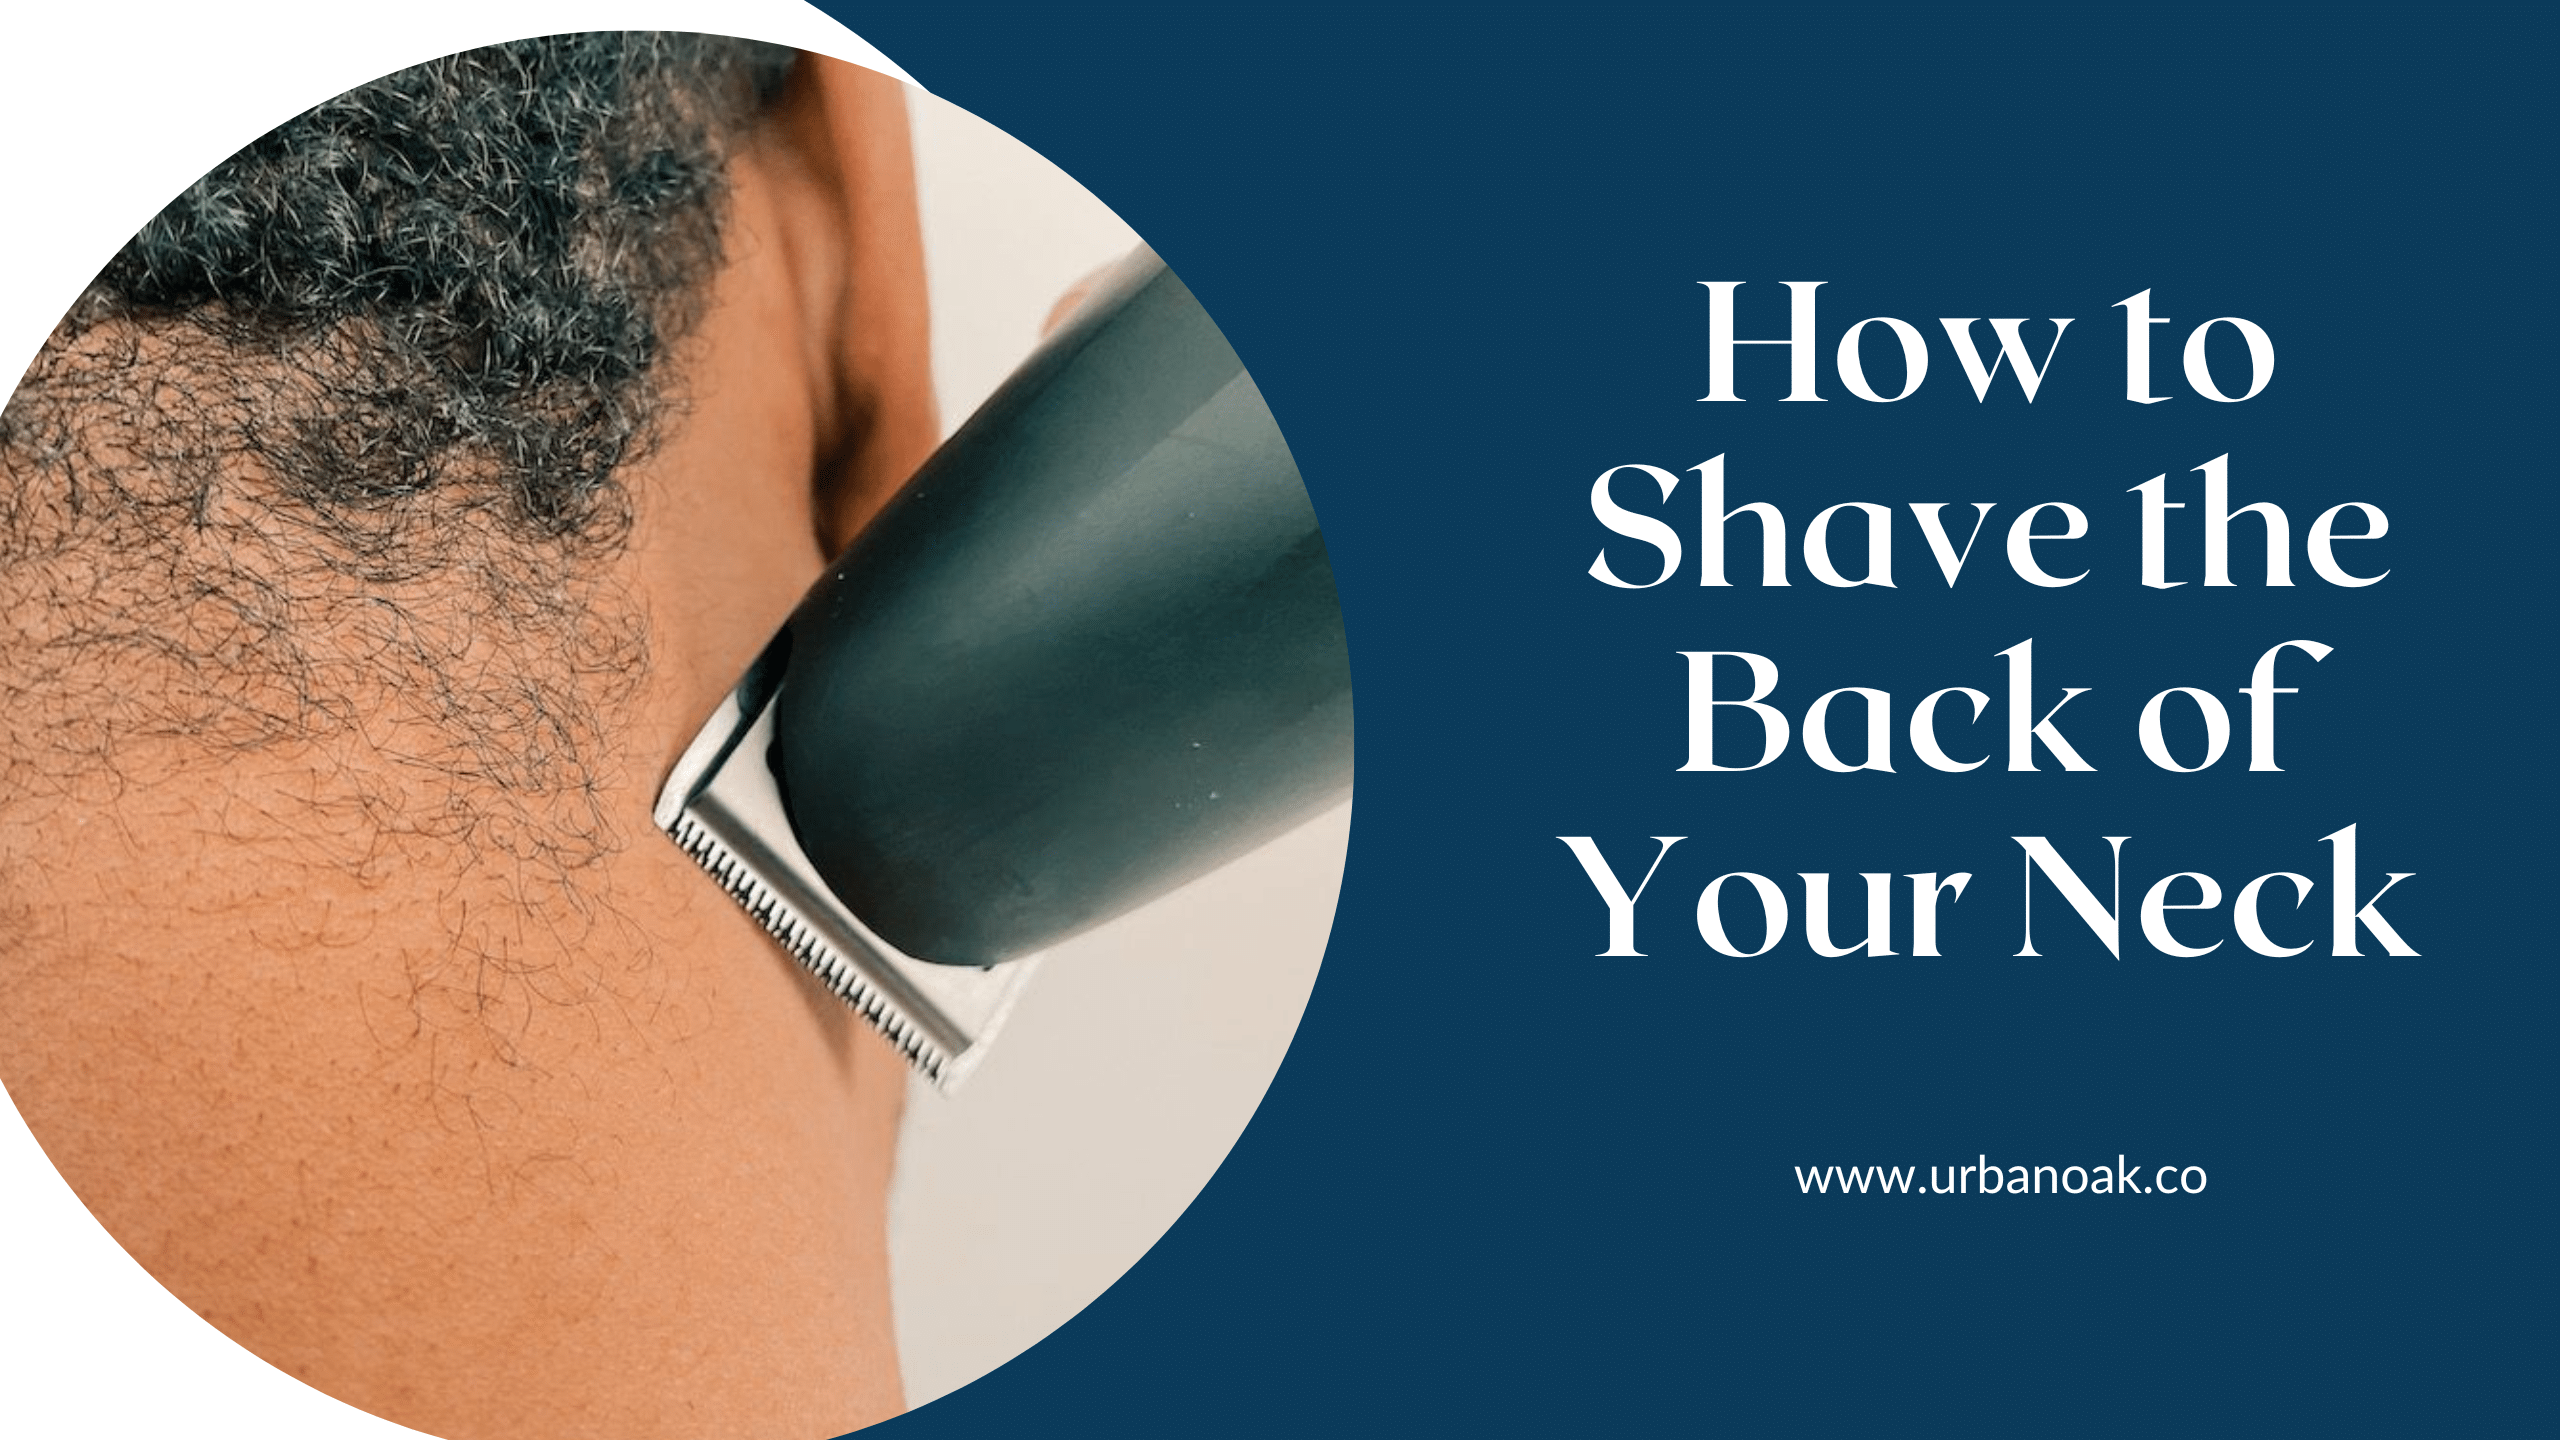 How to Shave the Back of Your Neck